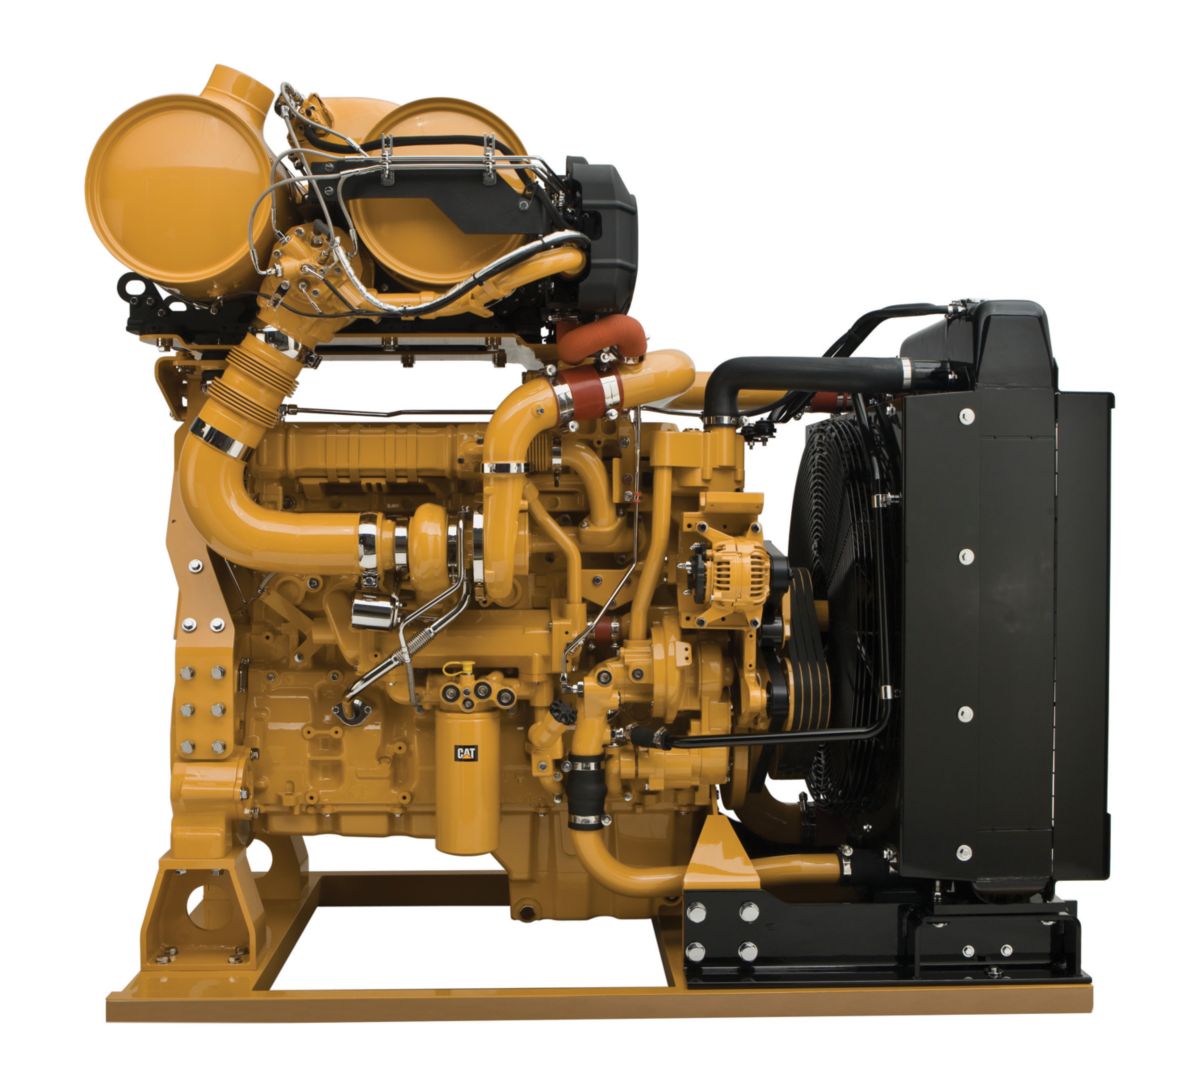 C15 ACERT™ (Water-Cooled Mainfold) Well Service Engines